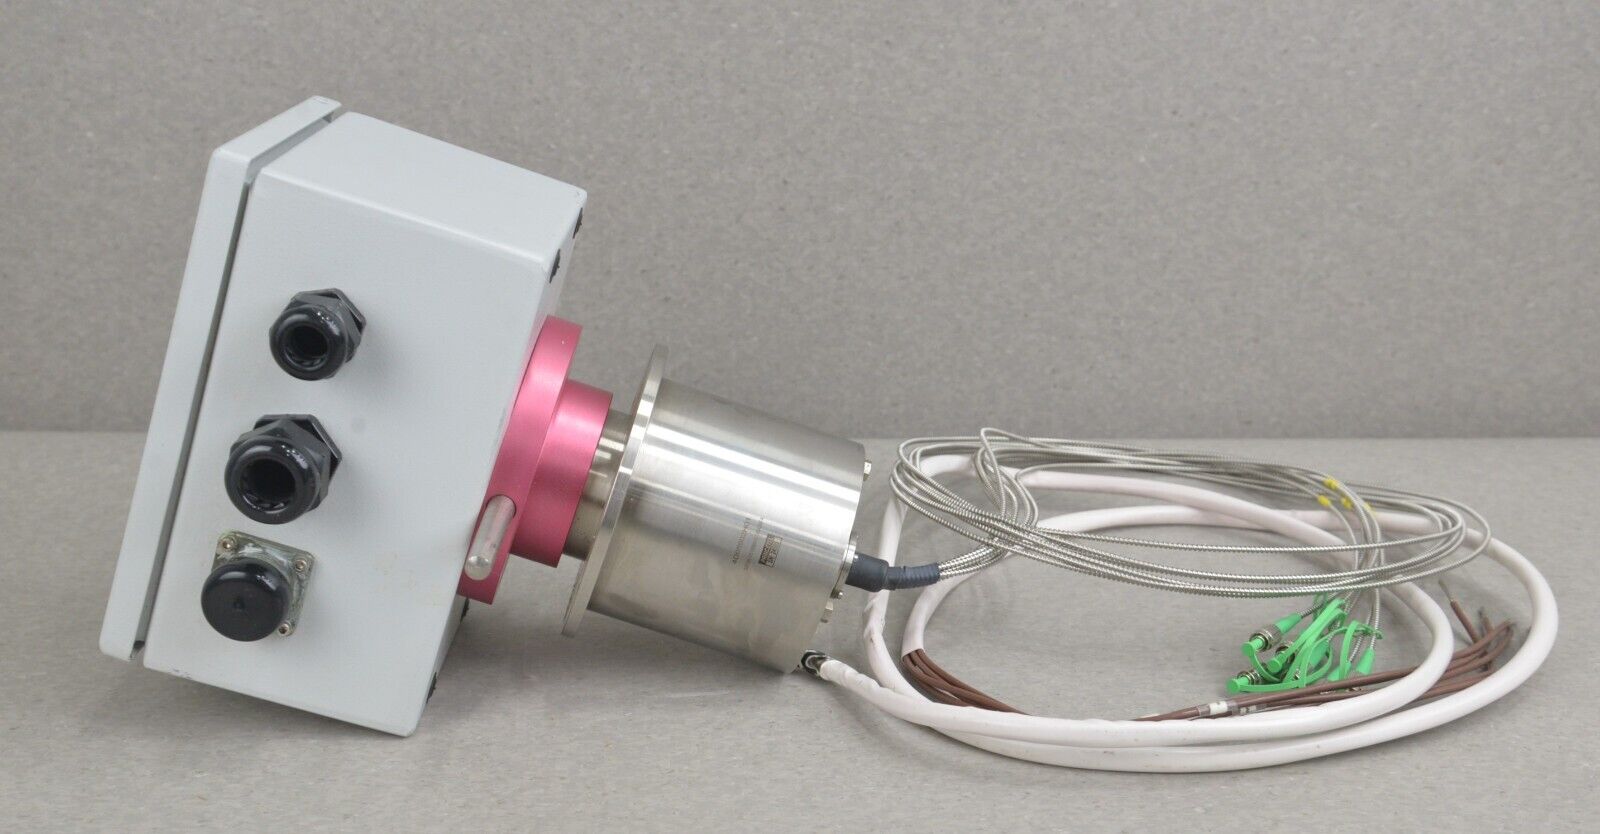 What is the concept behind the introduction of the fiber optic slip ring?